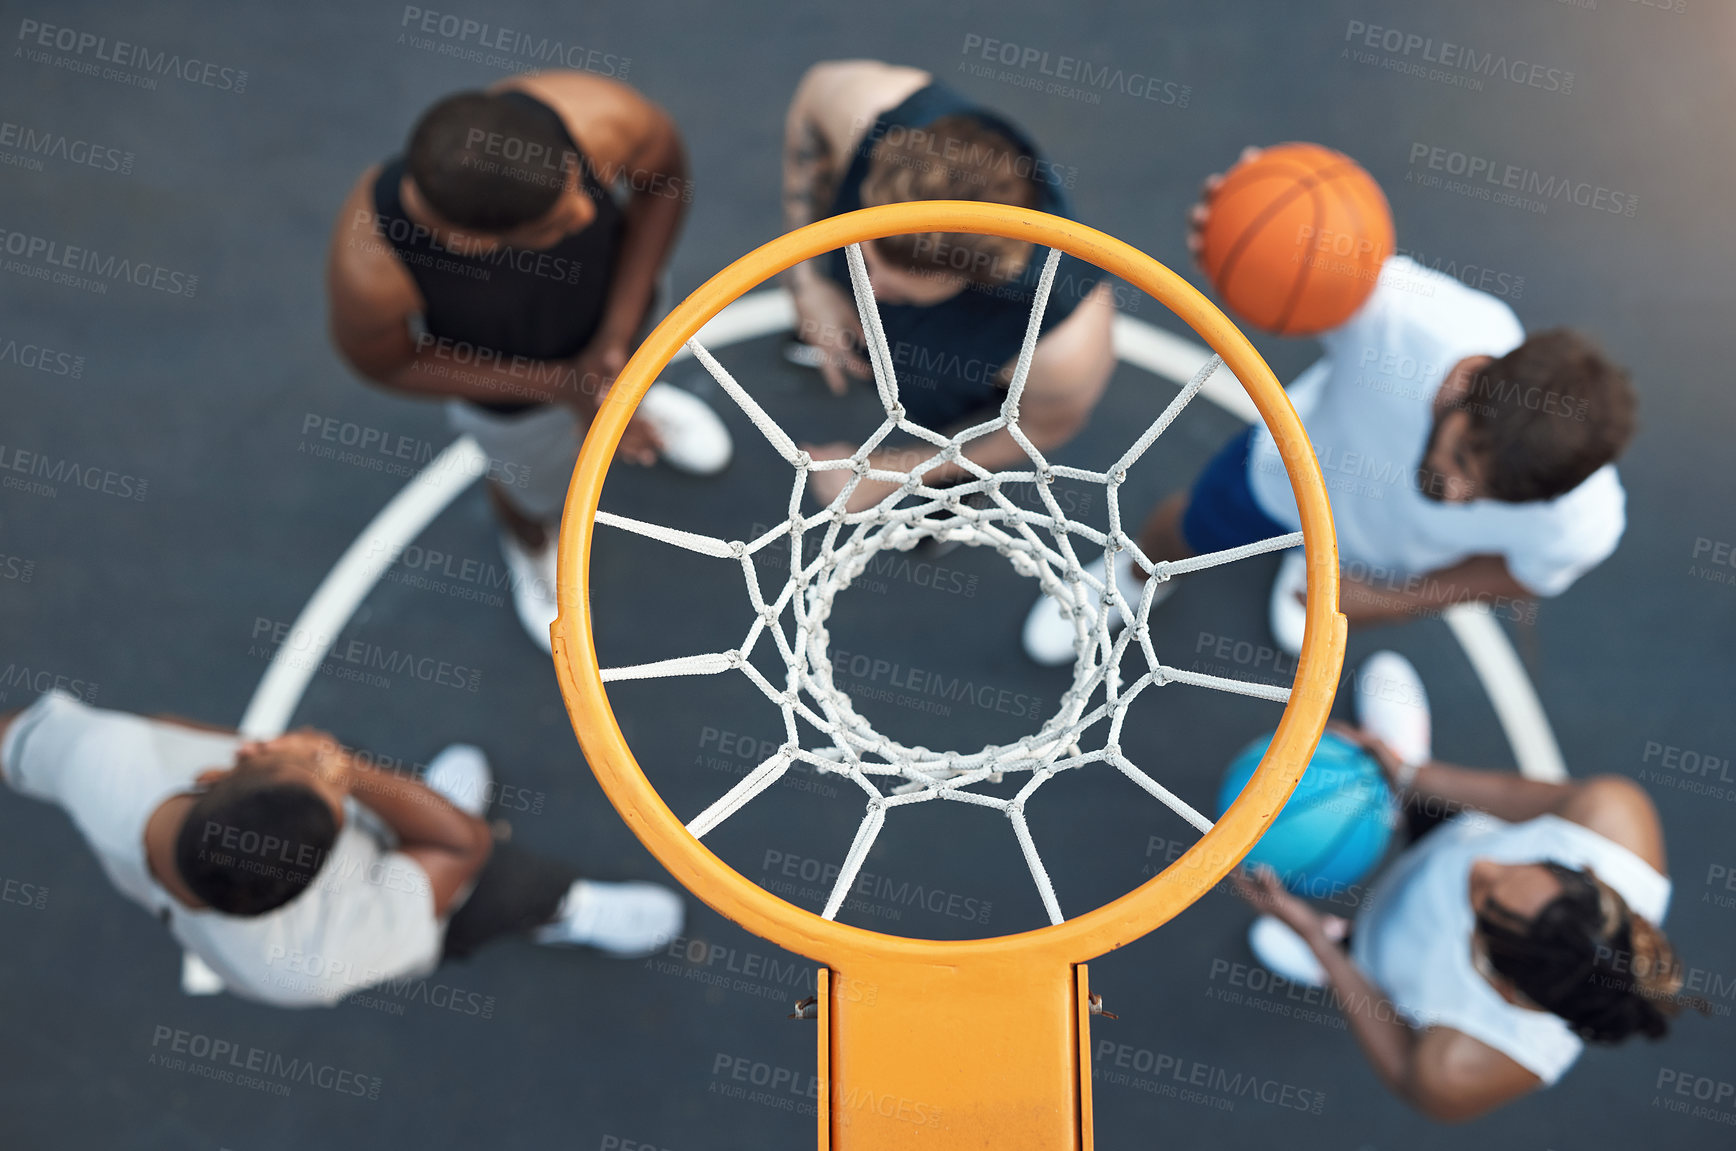 Buy stock photo High angle shot of a group of sporty young men hanging out on a basketball court